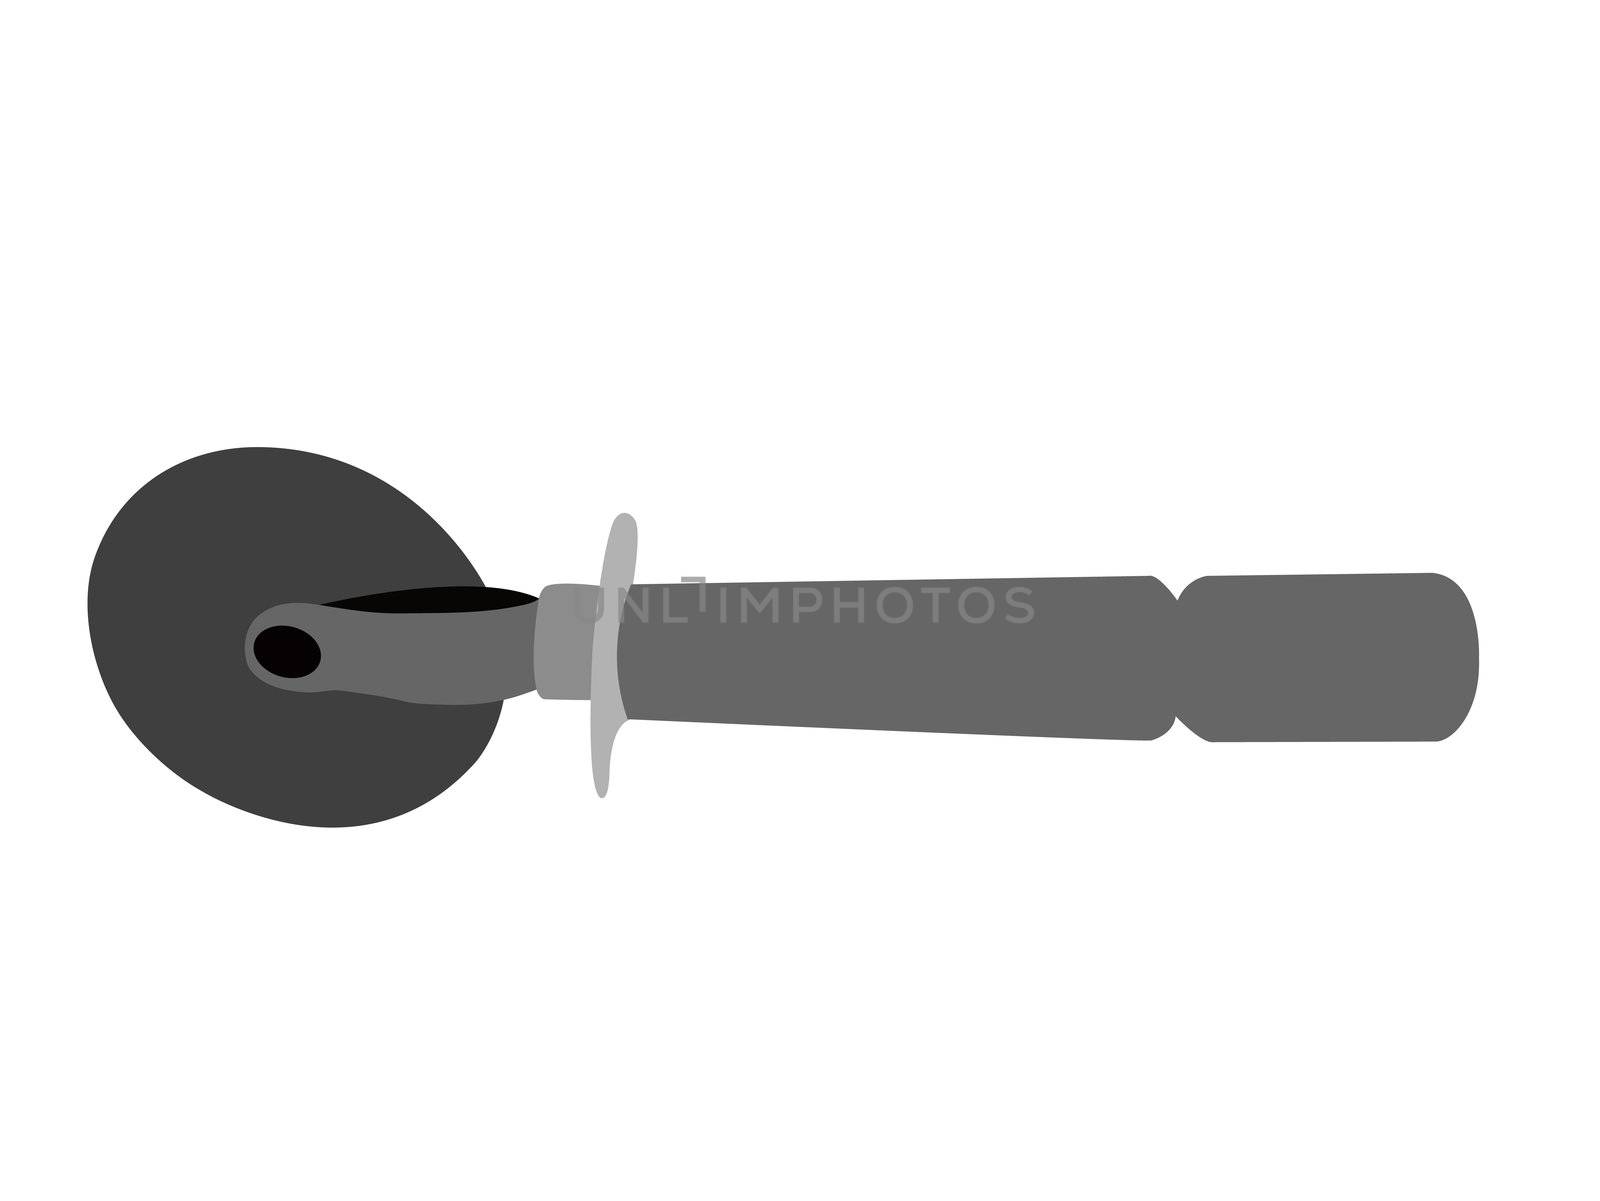 pizza cutter on isolated white background